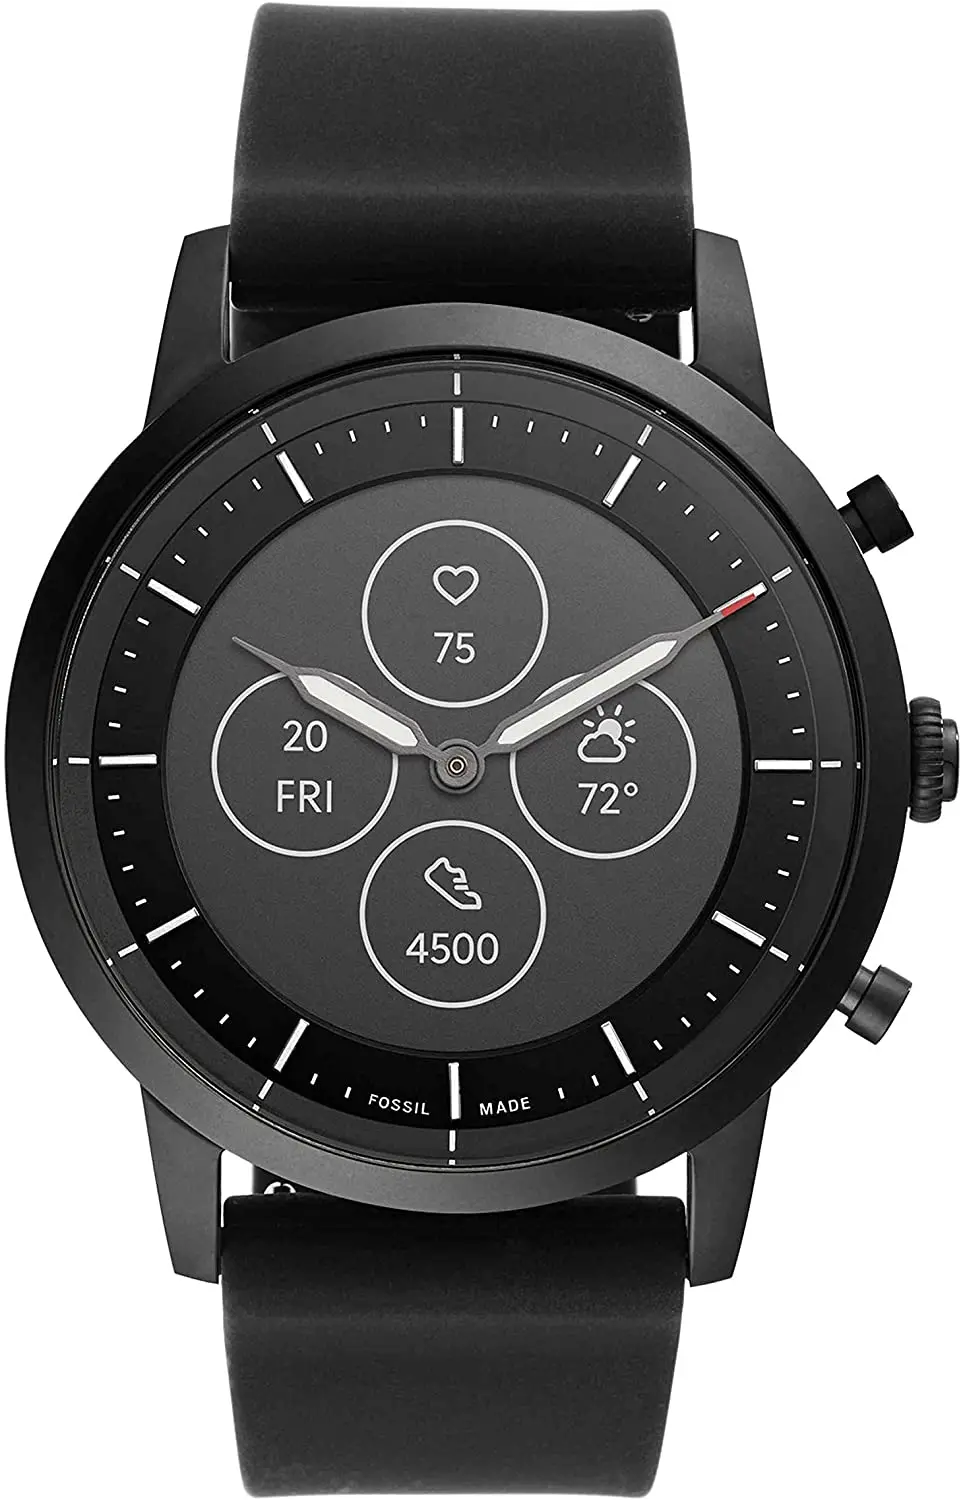 

Fossil Men's Collider Hybrid Smartwatch HR with Always-On Readout Display, Heart Rate, Activity Tracking, Smartphone